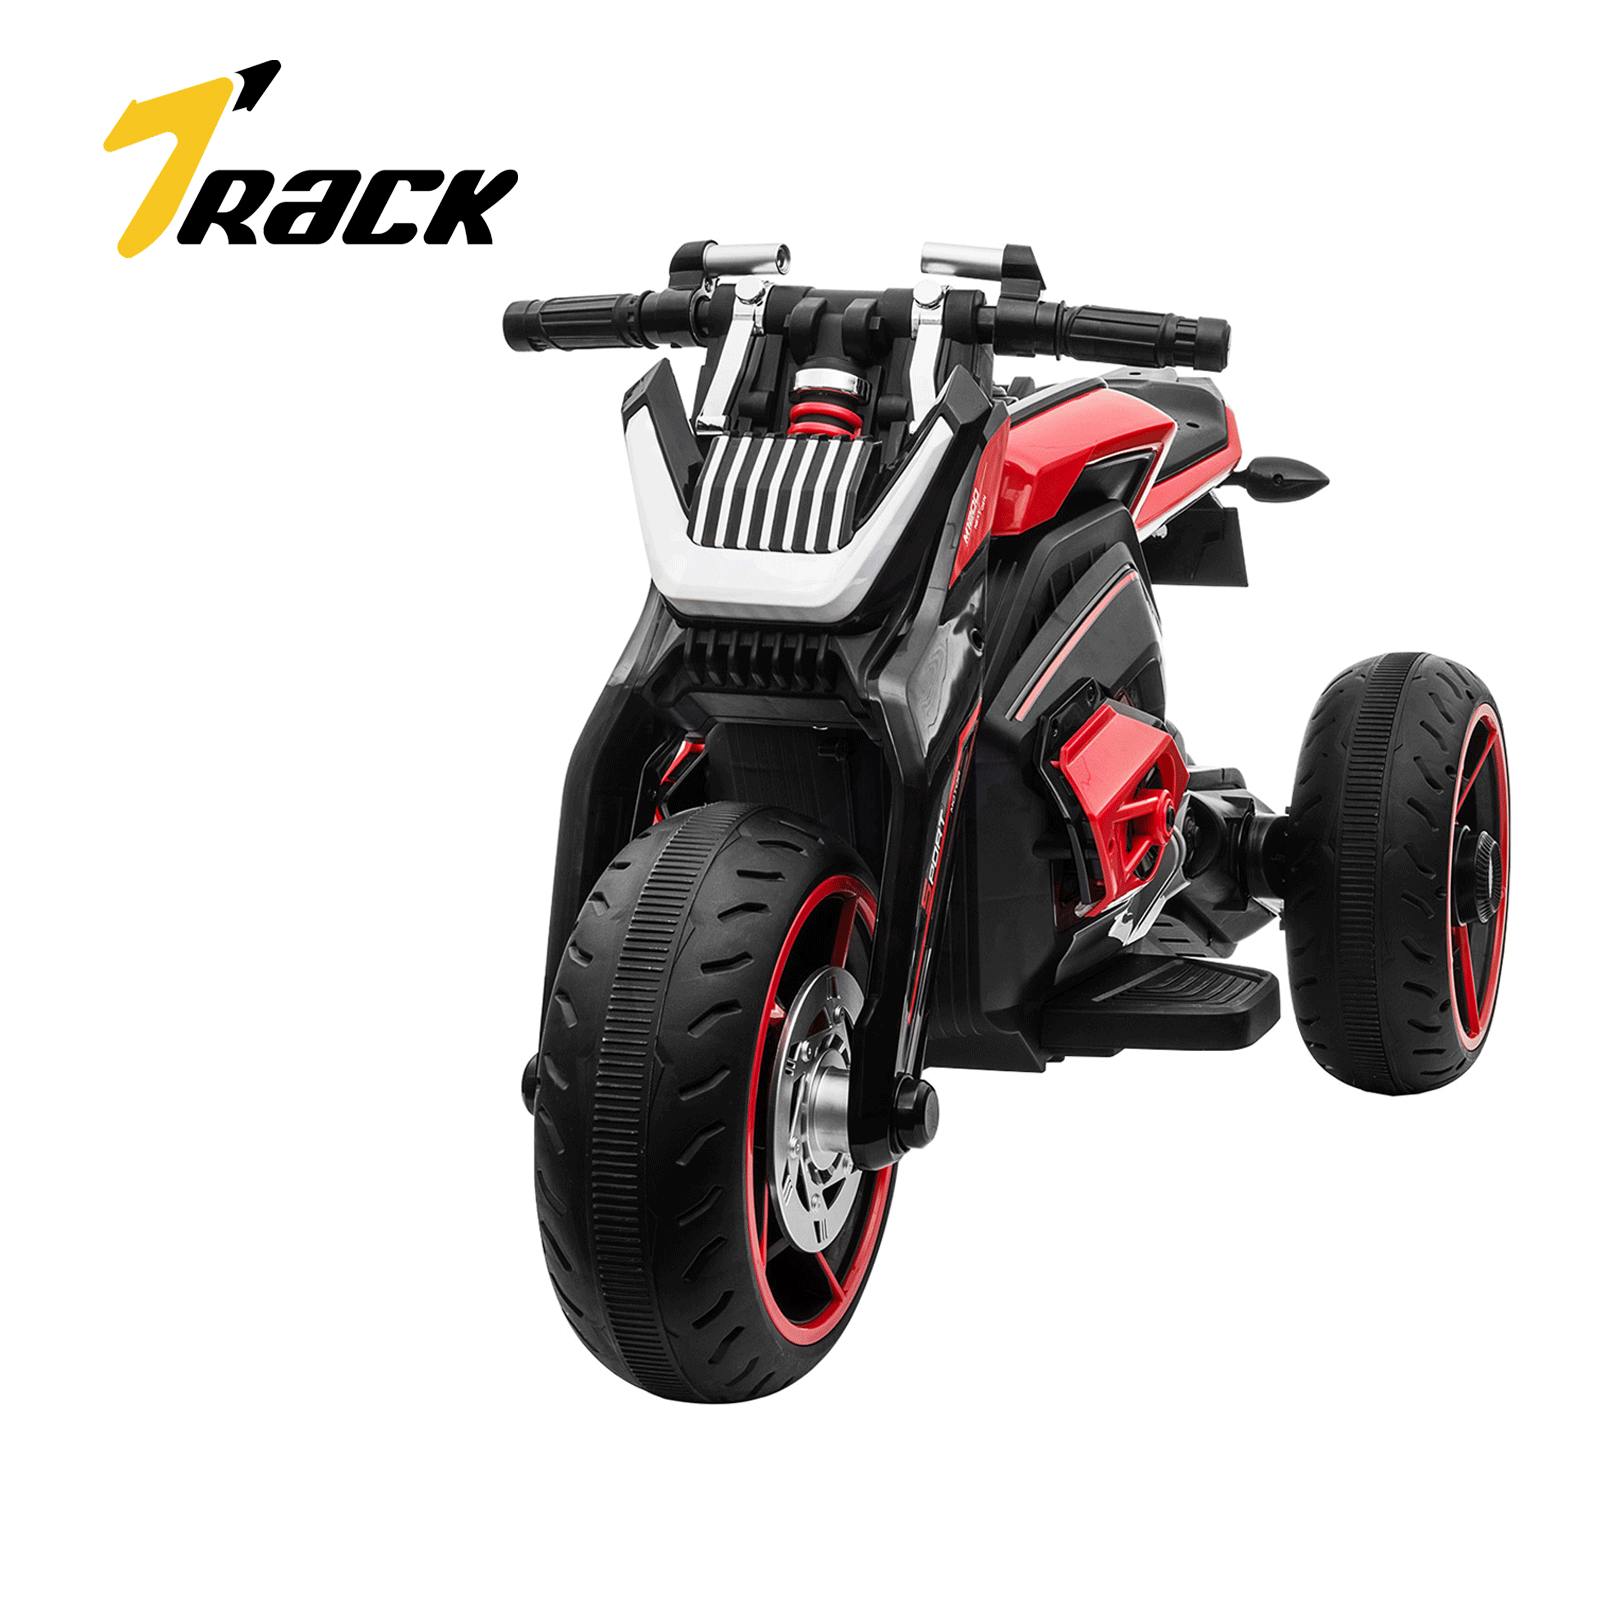 Track Seven 12V Kids Ride on Motorcycle,Electric Trike Motorcycle for Boys Girls,3 Wheels,Red